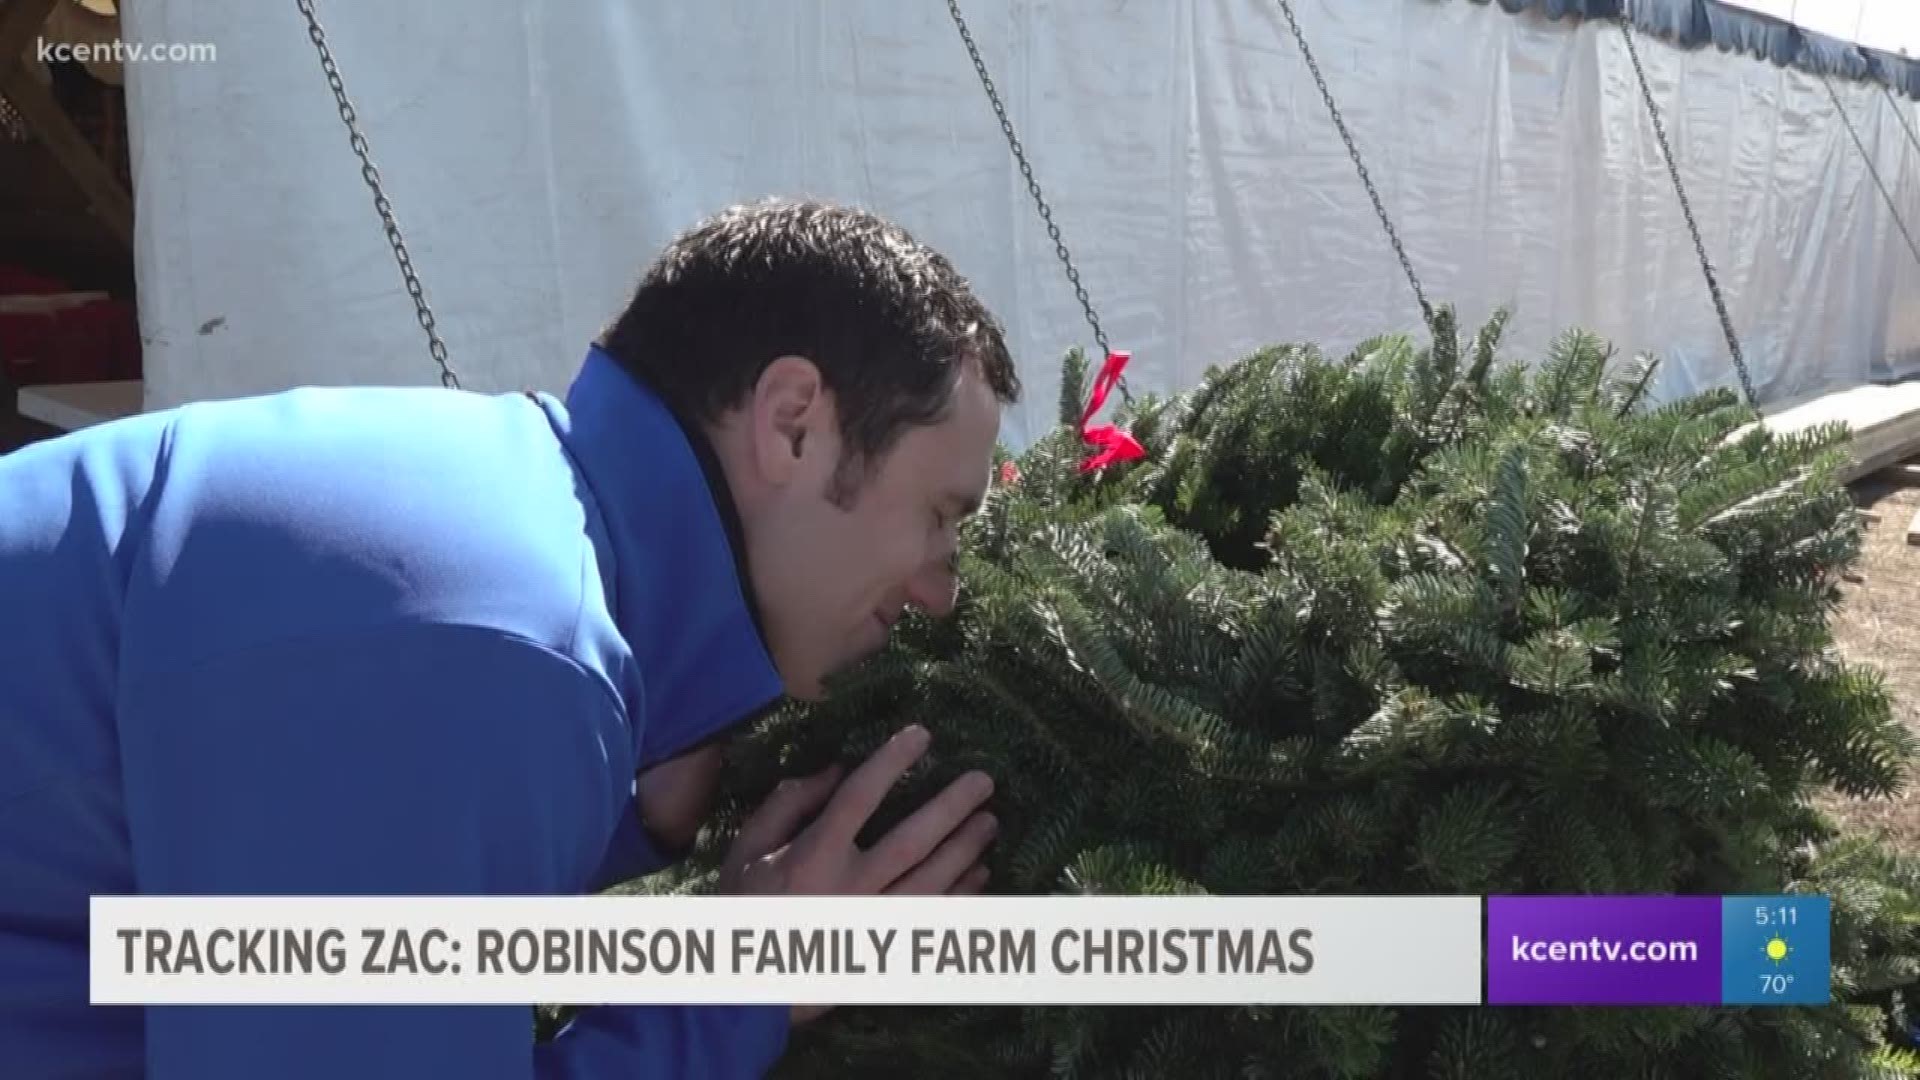 Fresh Christmas trees are in at the Robinson Family Farm.